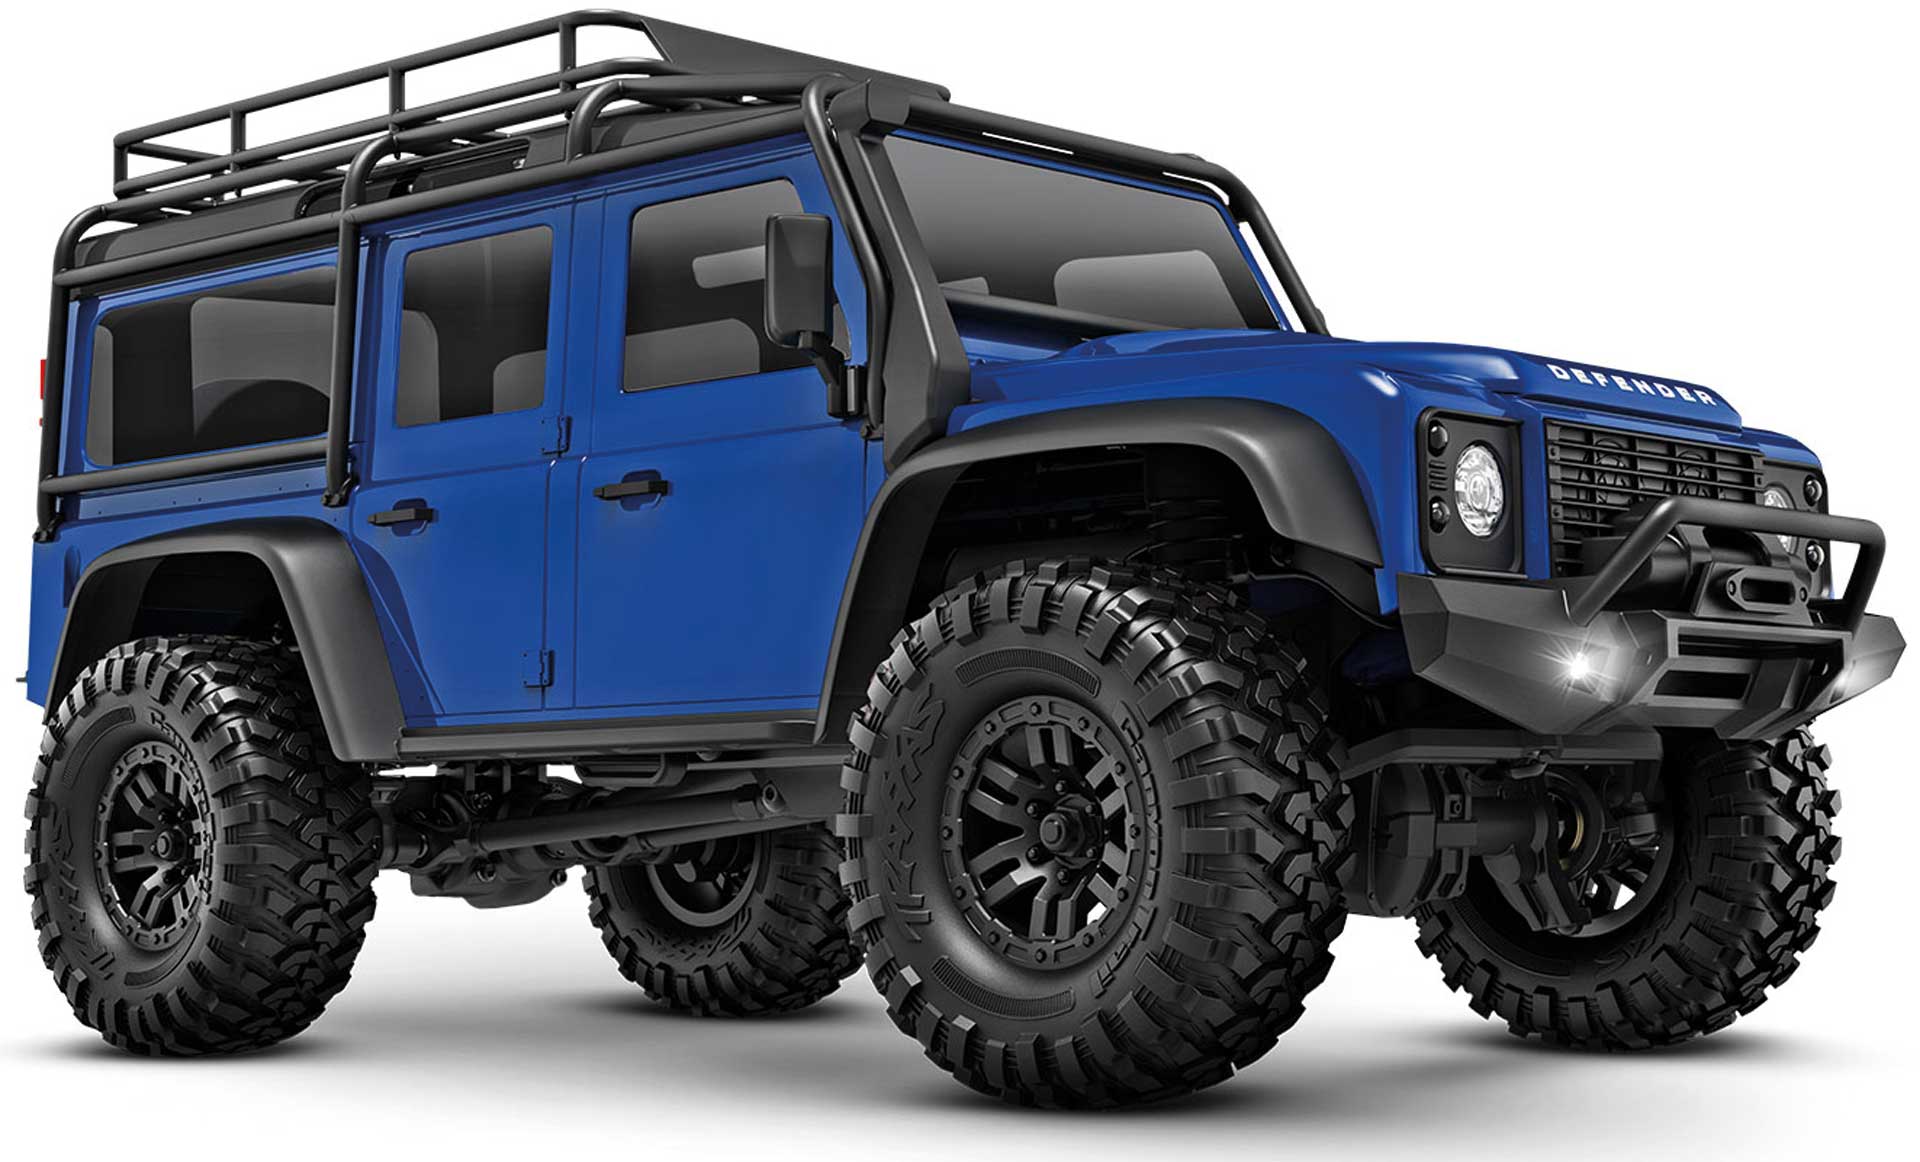 TRAXXAS TRX-4M Land Rover Defender blue 1/18 4WD RTR Scale Crawler with batterie/charger